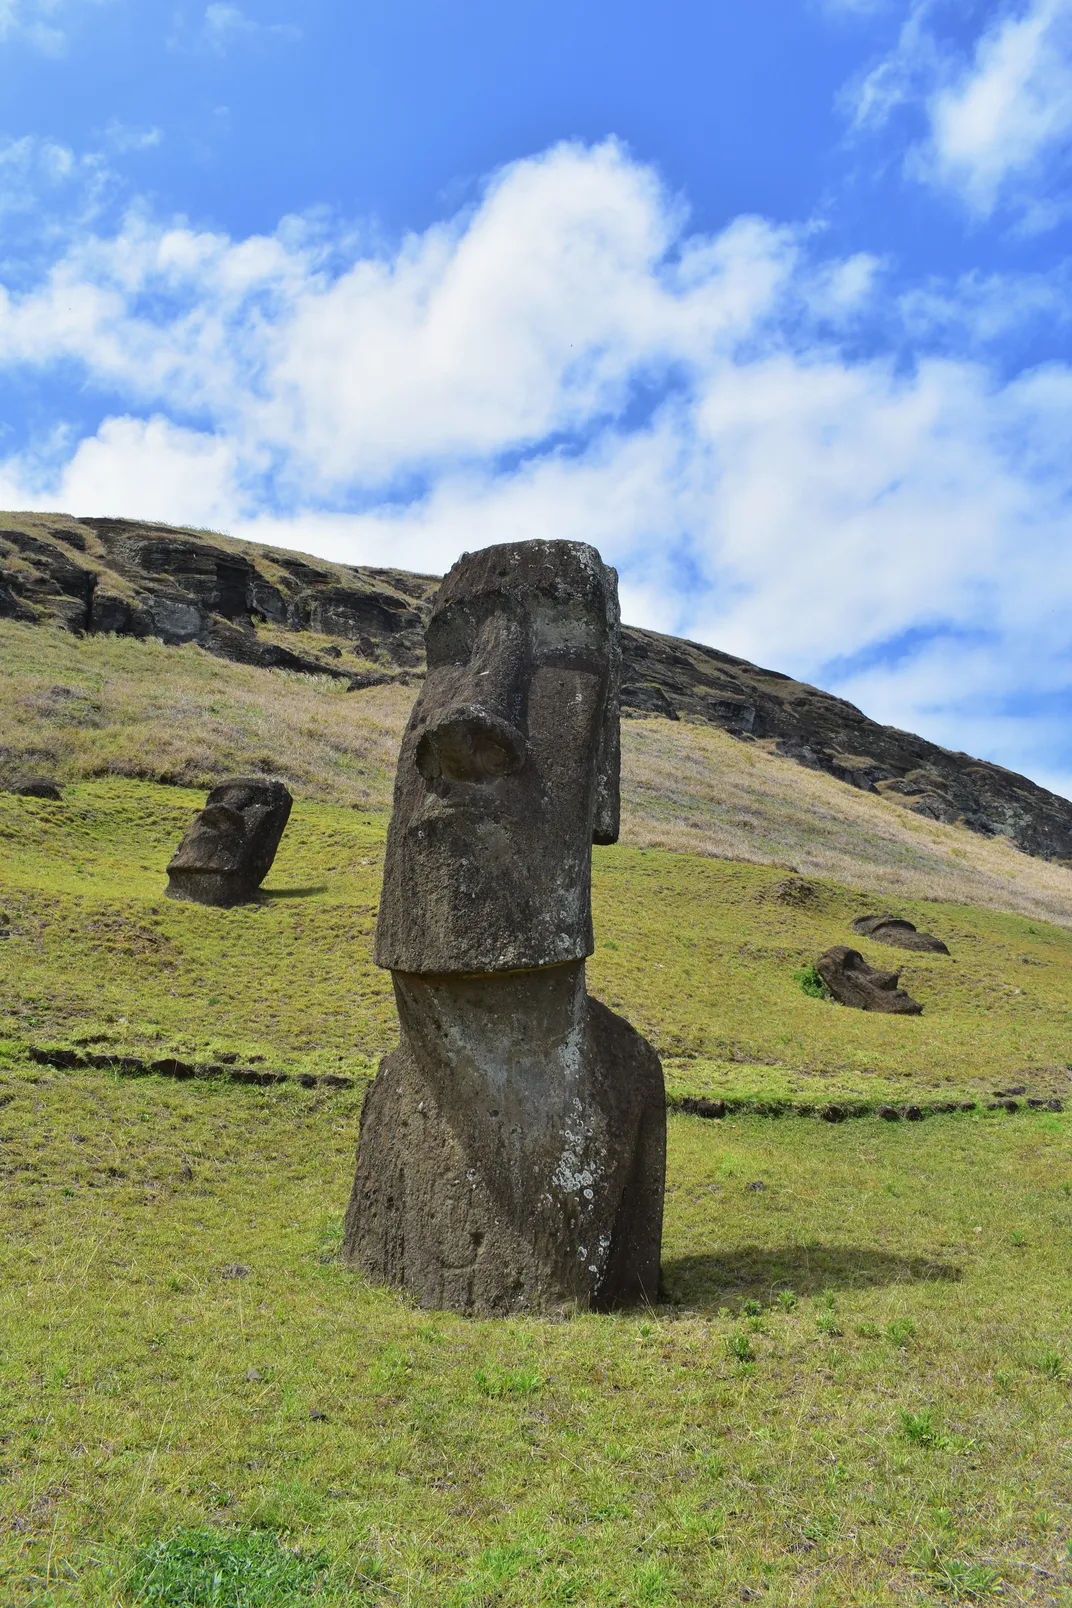 large stone heads and shoulders on a green hill with a partly cloudy sky